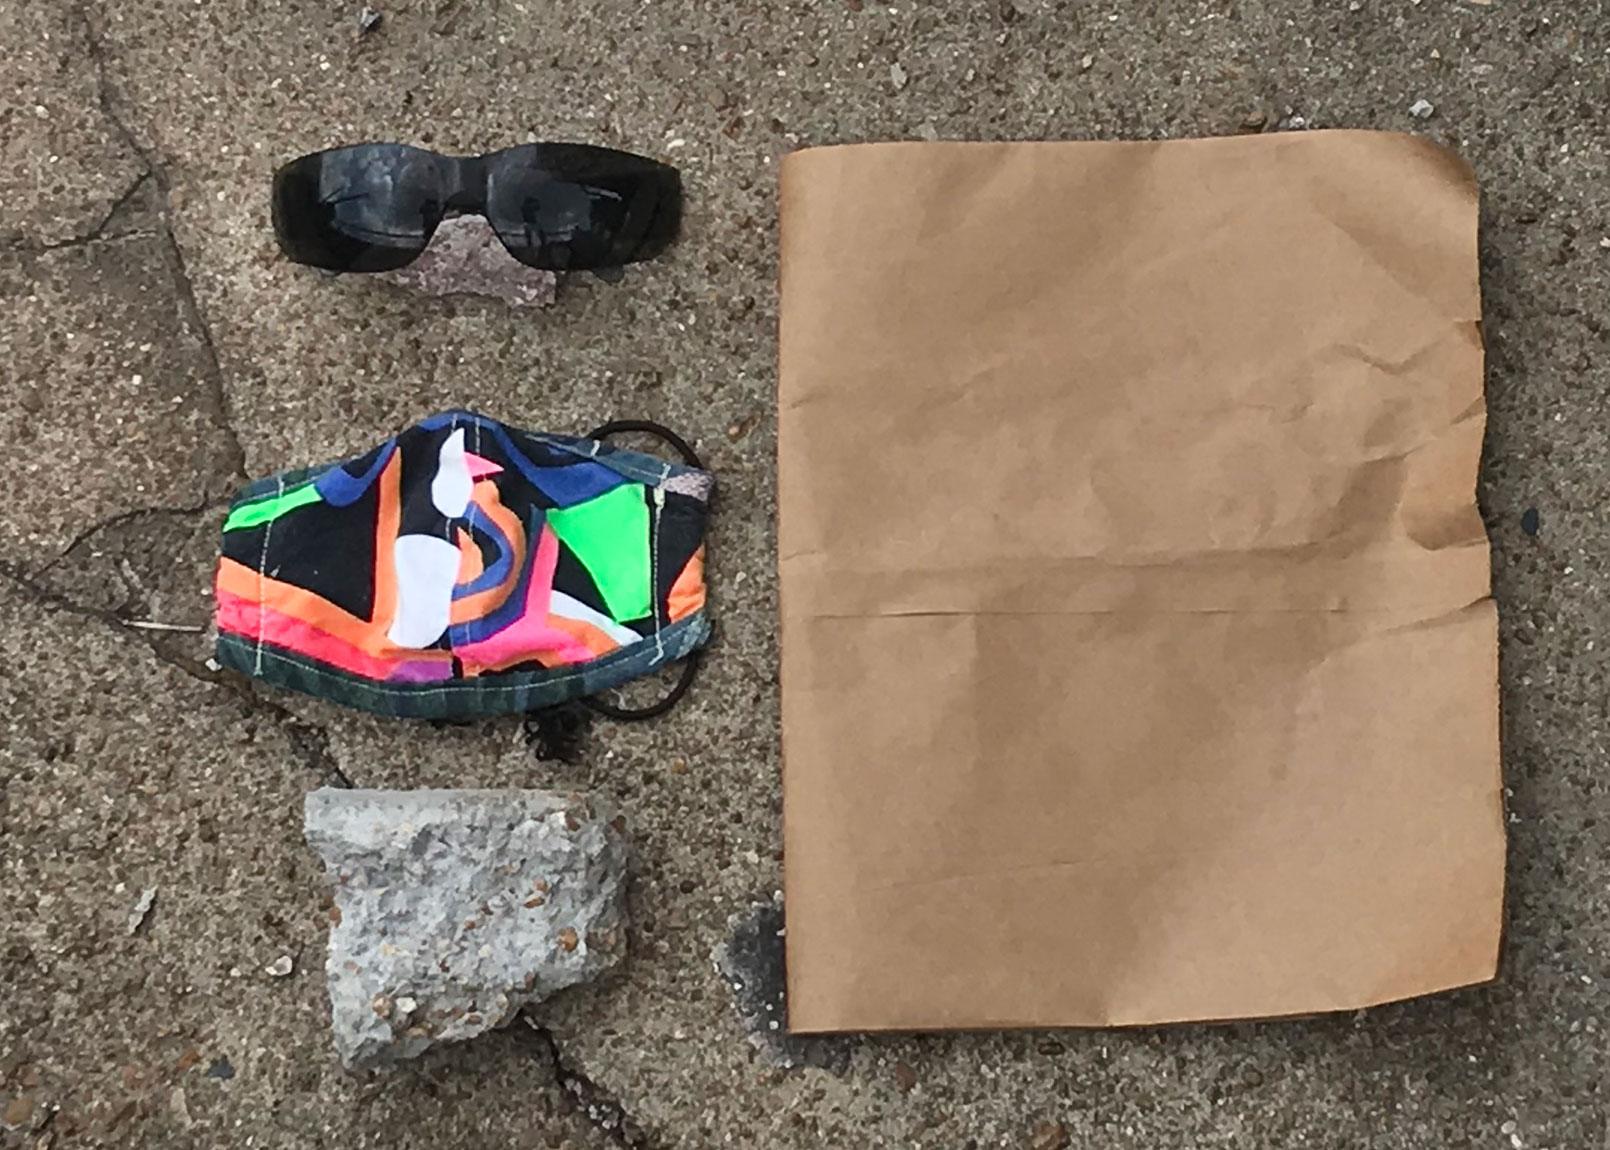 A brown piece of paper lies on the pavement beside a black pair of sunglasses, a colorful face mask, and a rock.